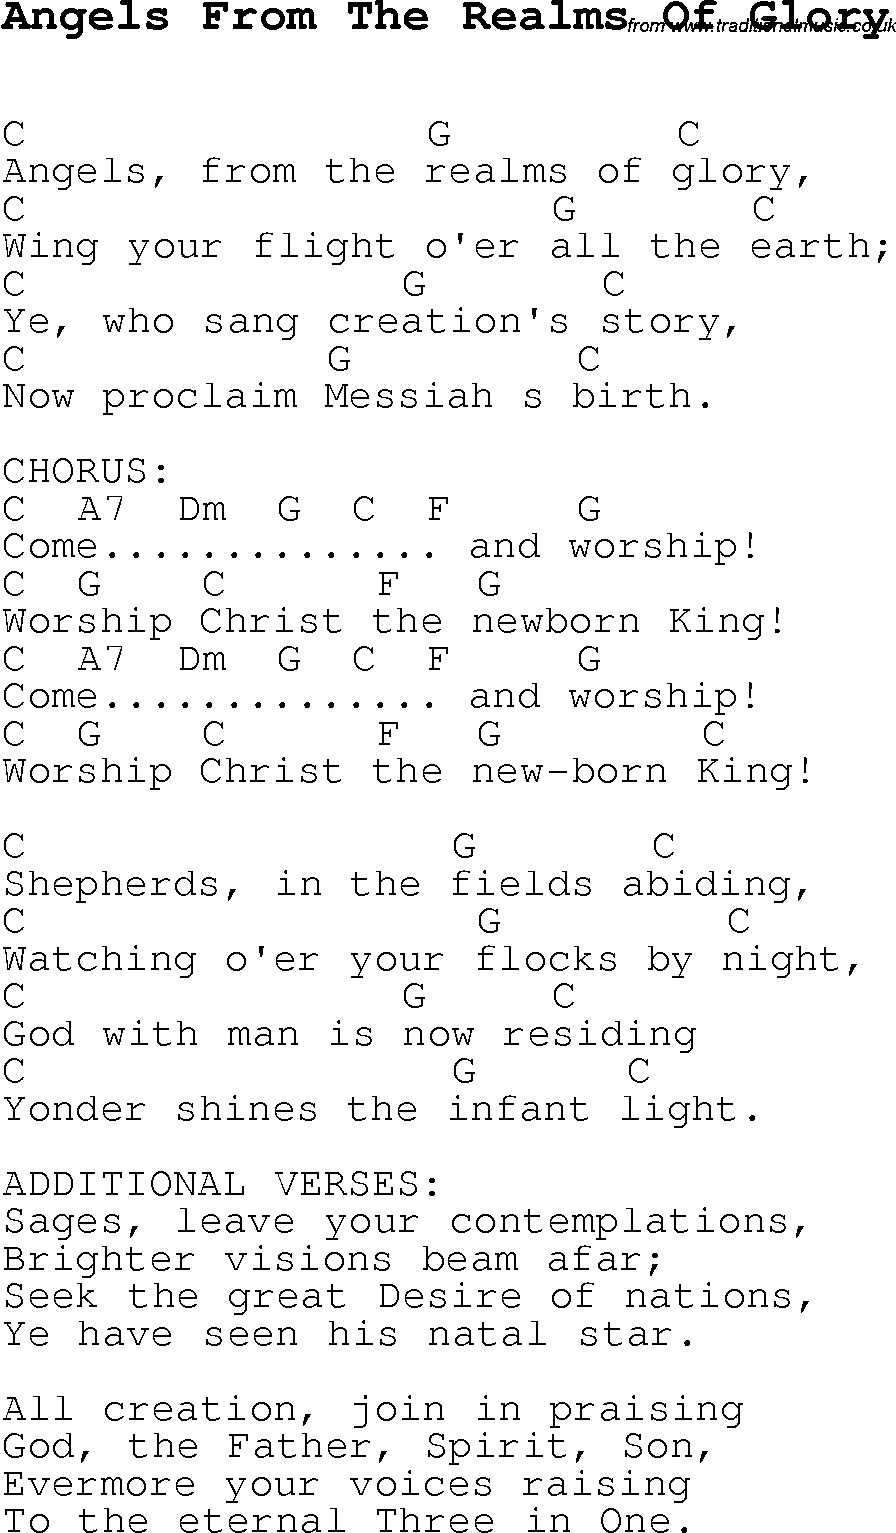 Christmas Songs and Carols, lyrics with chords for guitar banjo for Angels From The Realms Of Glory